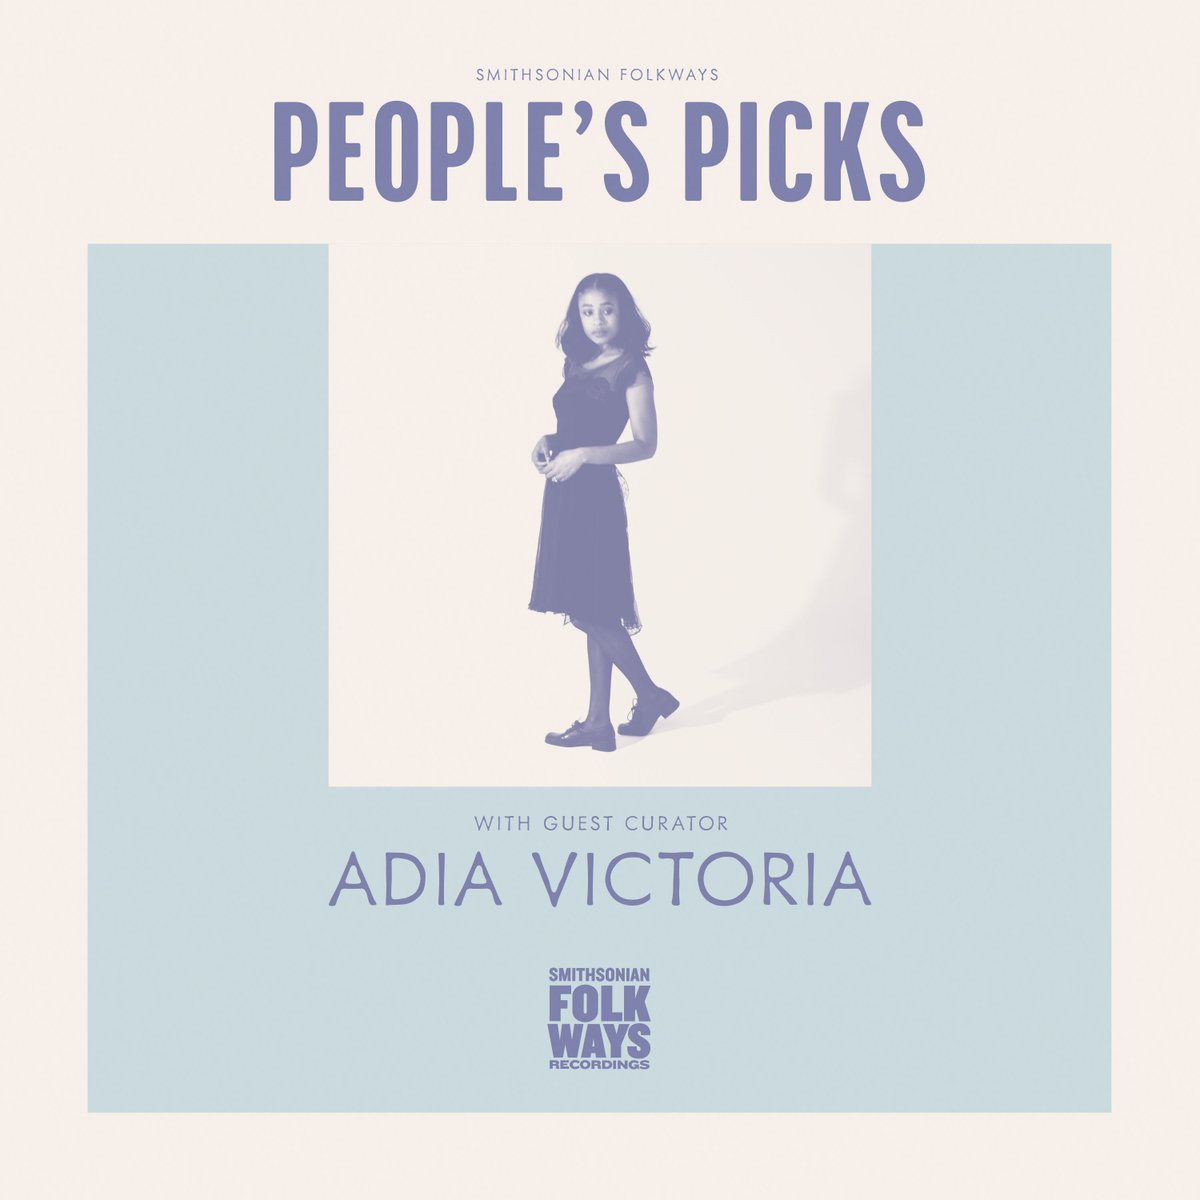 'The fourteen songs I featured from the Smithsonian Folkways archives are clear examples of that kind of haunting 'everywhere and nowhere' unease that keeps the Blues at the forefront of our cultural imagination.' Listen to @adiavictoria's People's Picks: s.si.edu/43UZjxy